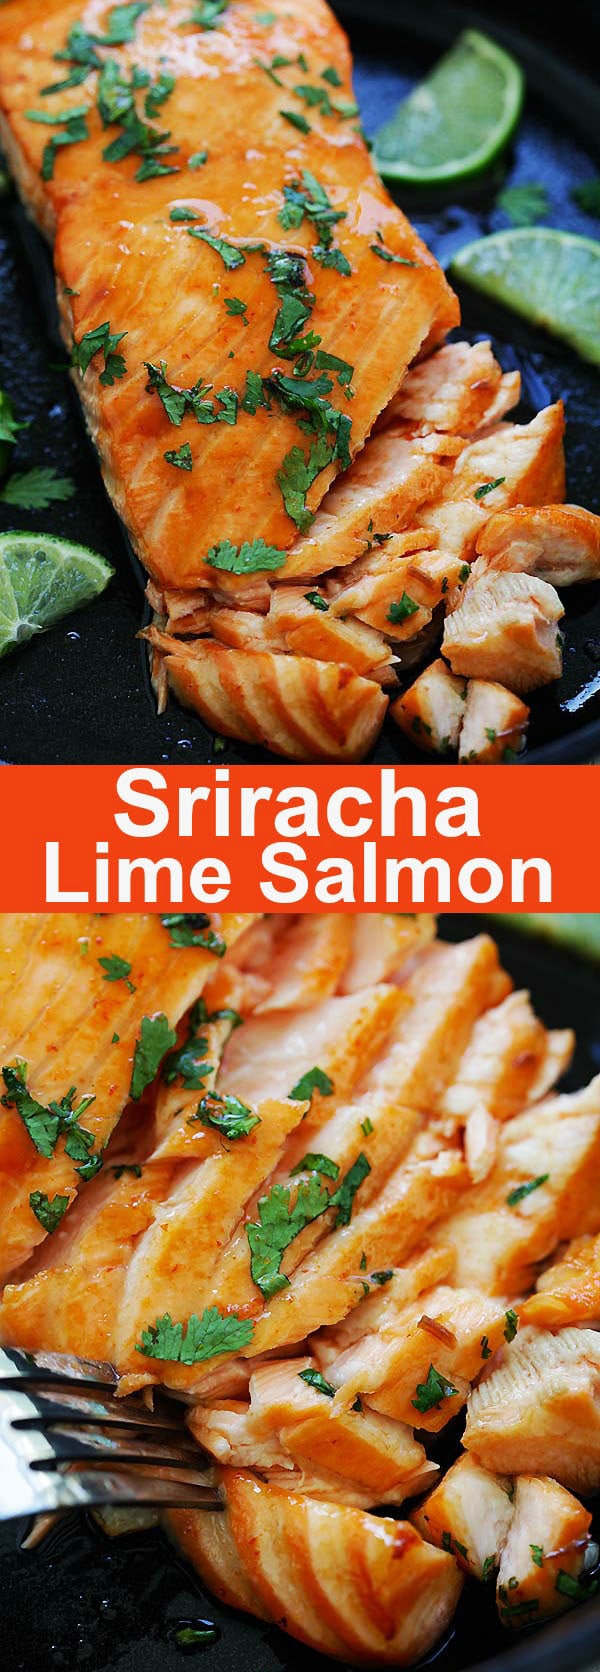 Sriracha Lime Salmon – Baked Salmon with delicious Sriracha and lime juice marinade. Moist, juicy and mouthwatering salmon recipe that you want to eat every day | rasamalaysia.com